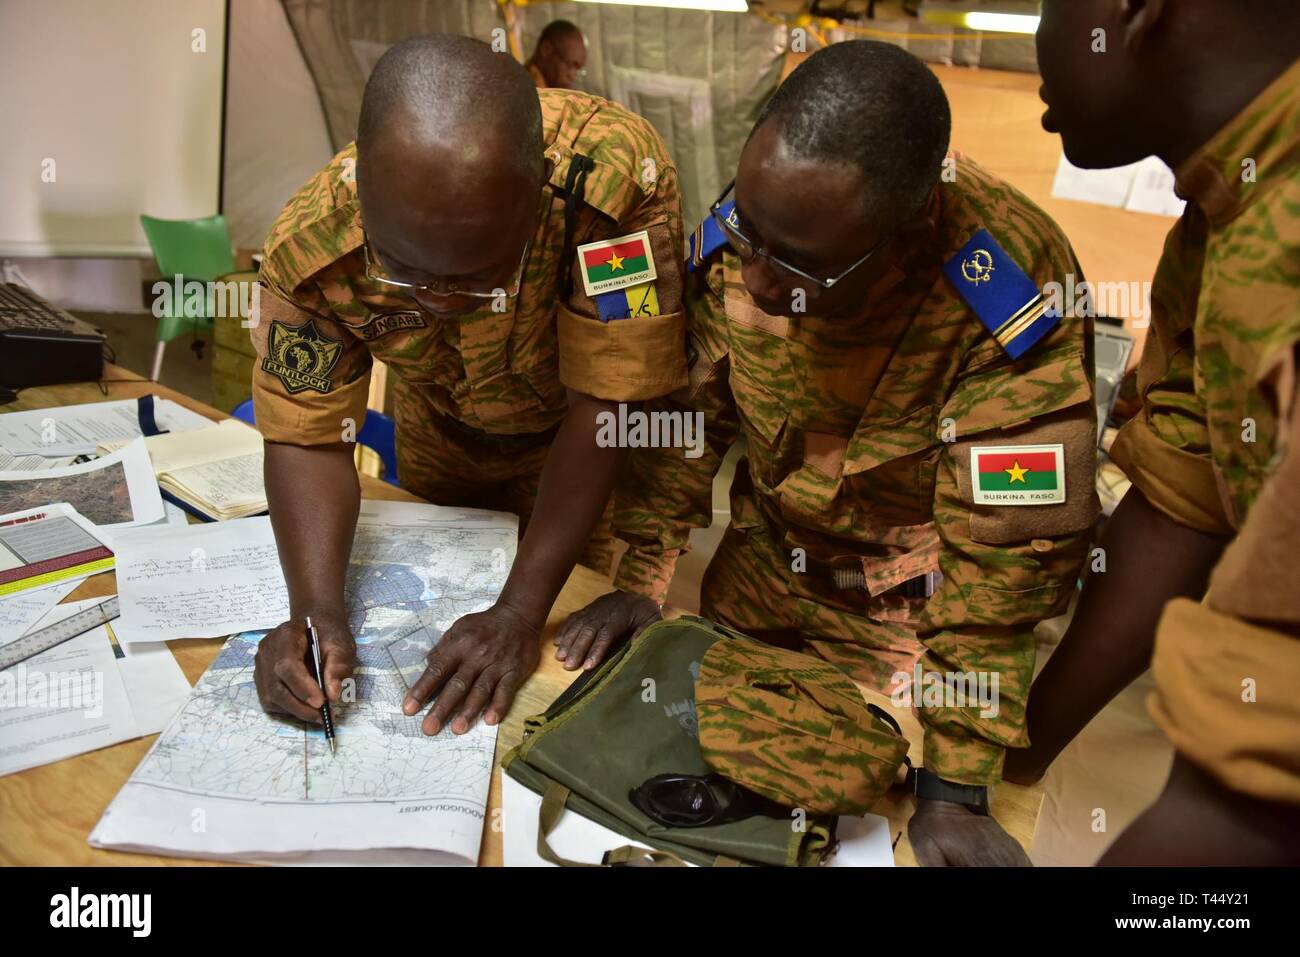 Burkina Faso Army leadership staying at base camp Loumbila conduct operational planning on Feb. 24, 2019 during exercise Flintlock 19. This team of Burkina Faso military leaders are in charge of providing command and control for all multinational western partners in Loumbila during the exercise's scenerio days. Flintlock provides military training opportunities that help foster relationships of peace, security, and cooperation. Stock Photo